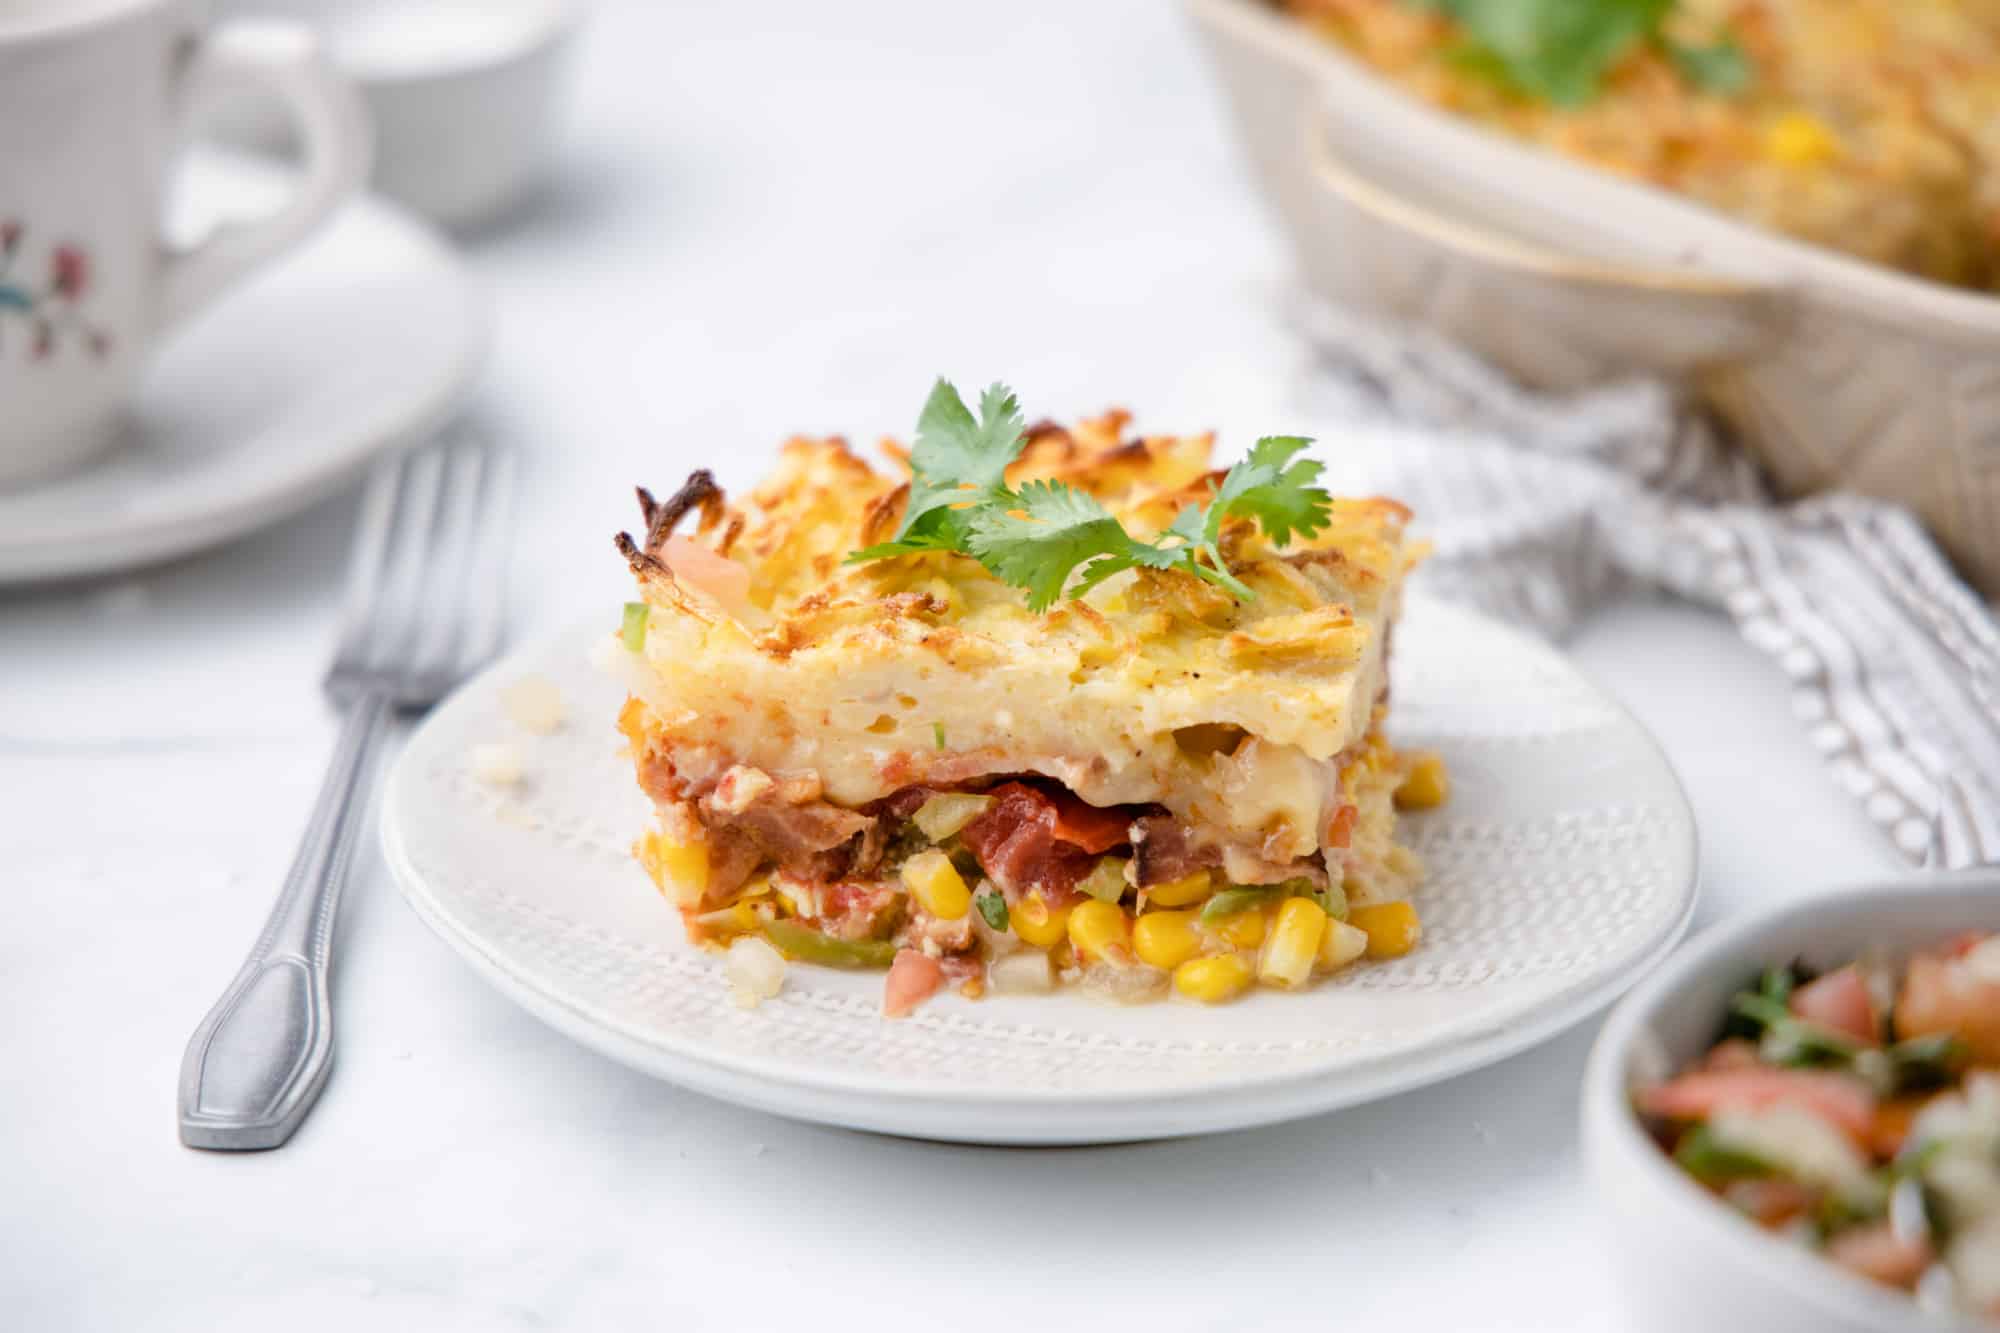 A piece of casserole with corn, bacon and shredded potatoes on a white plate with a fork and salsa.